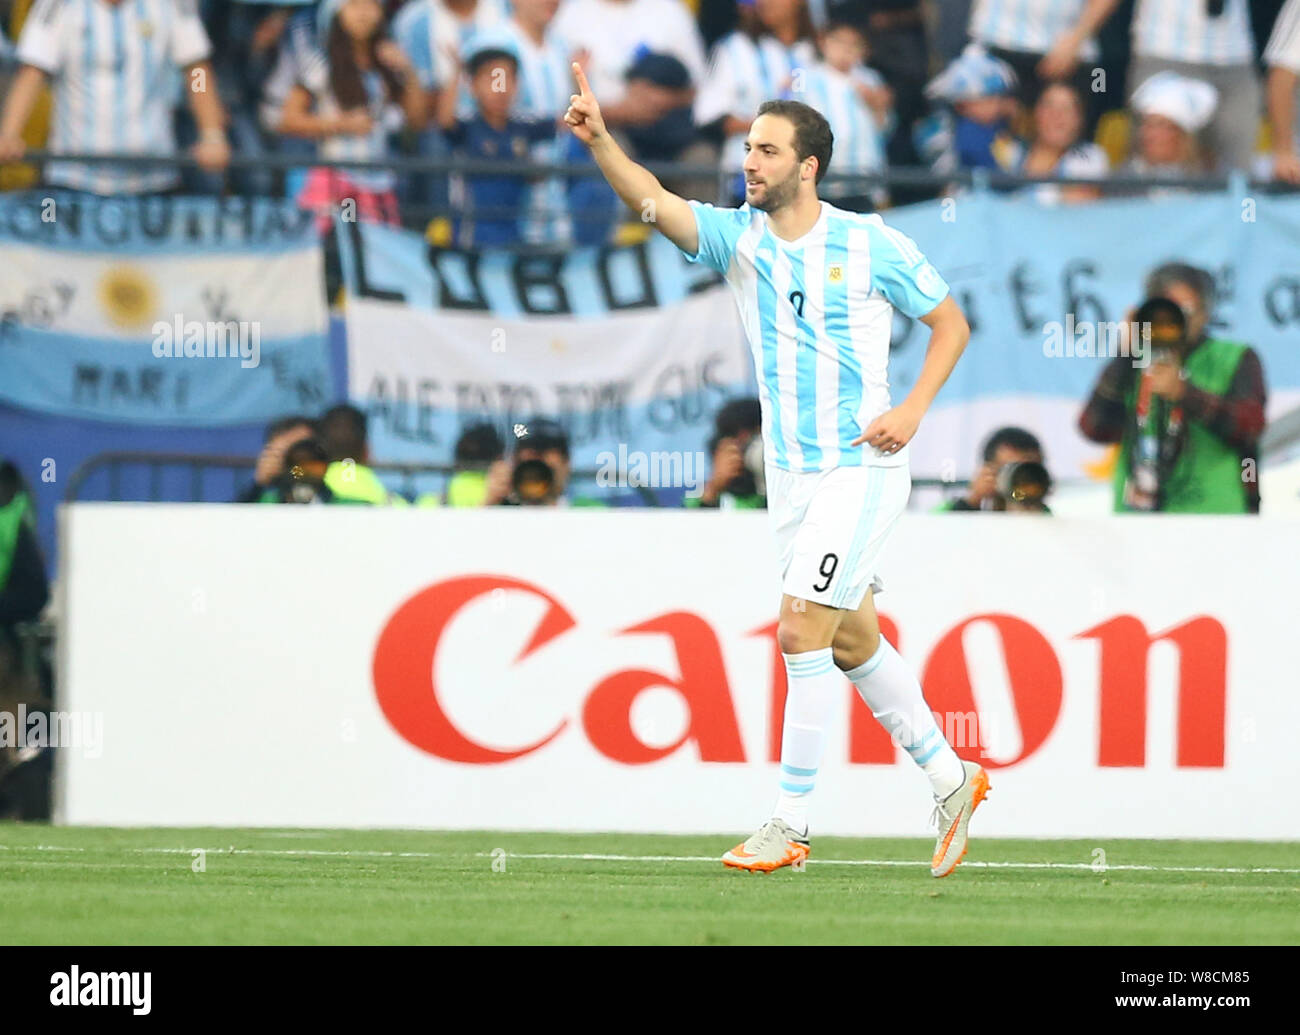 Argentina's Gonzalo Higuain celebrates after scoring against Jamaica during a Copa America Group B soccer match at the Sausalito Stadium in Vina del M Stock Photo